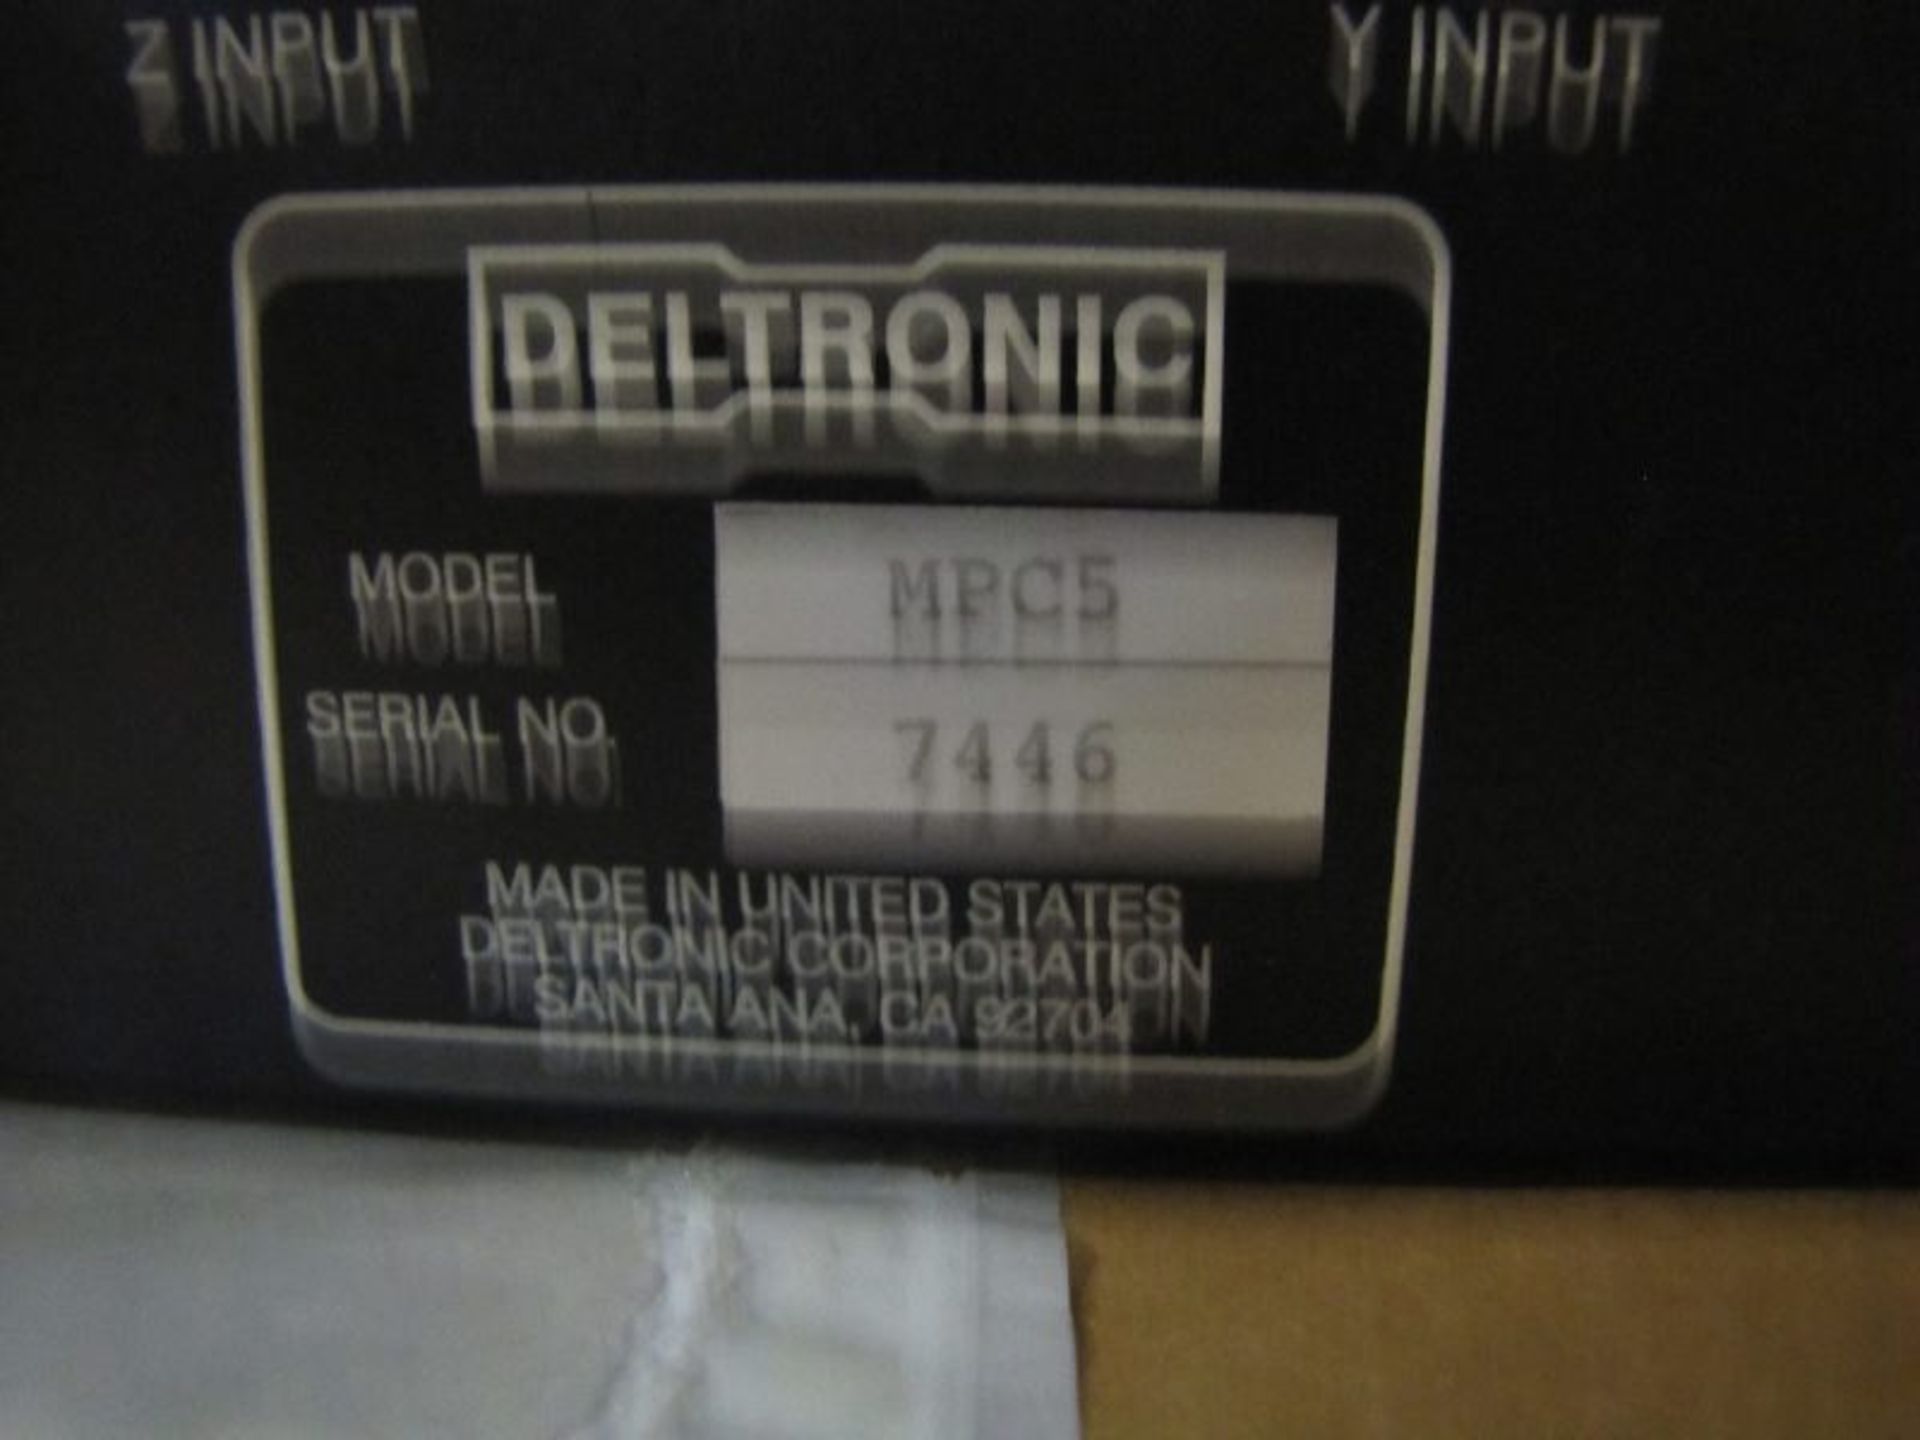 Deltronic Model DH14-612E Horizontal Beam Optical Comparator, Screen Diameter 14”, Size of Measuring - Image 4 of 4